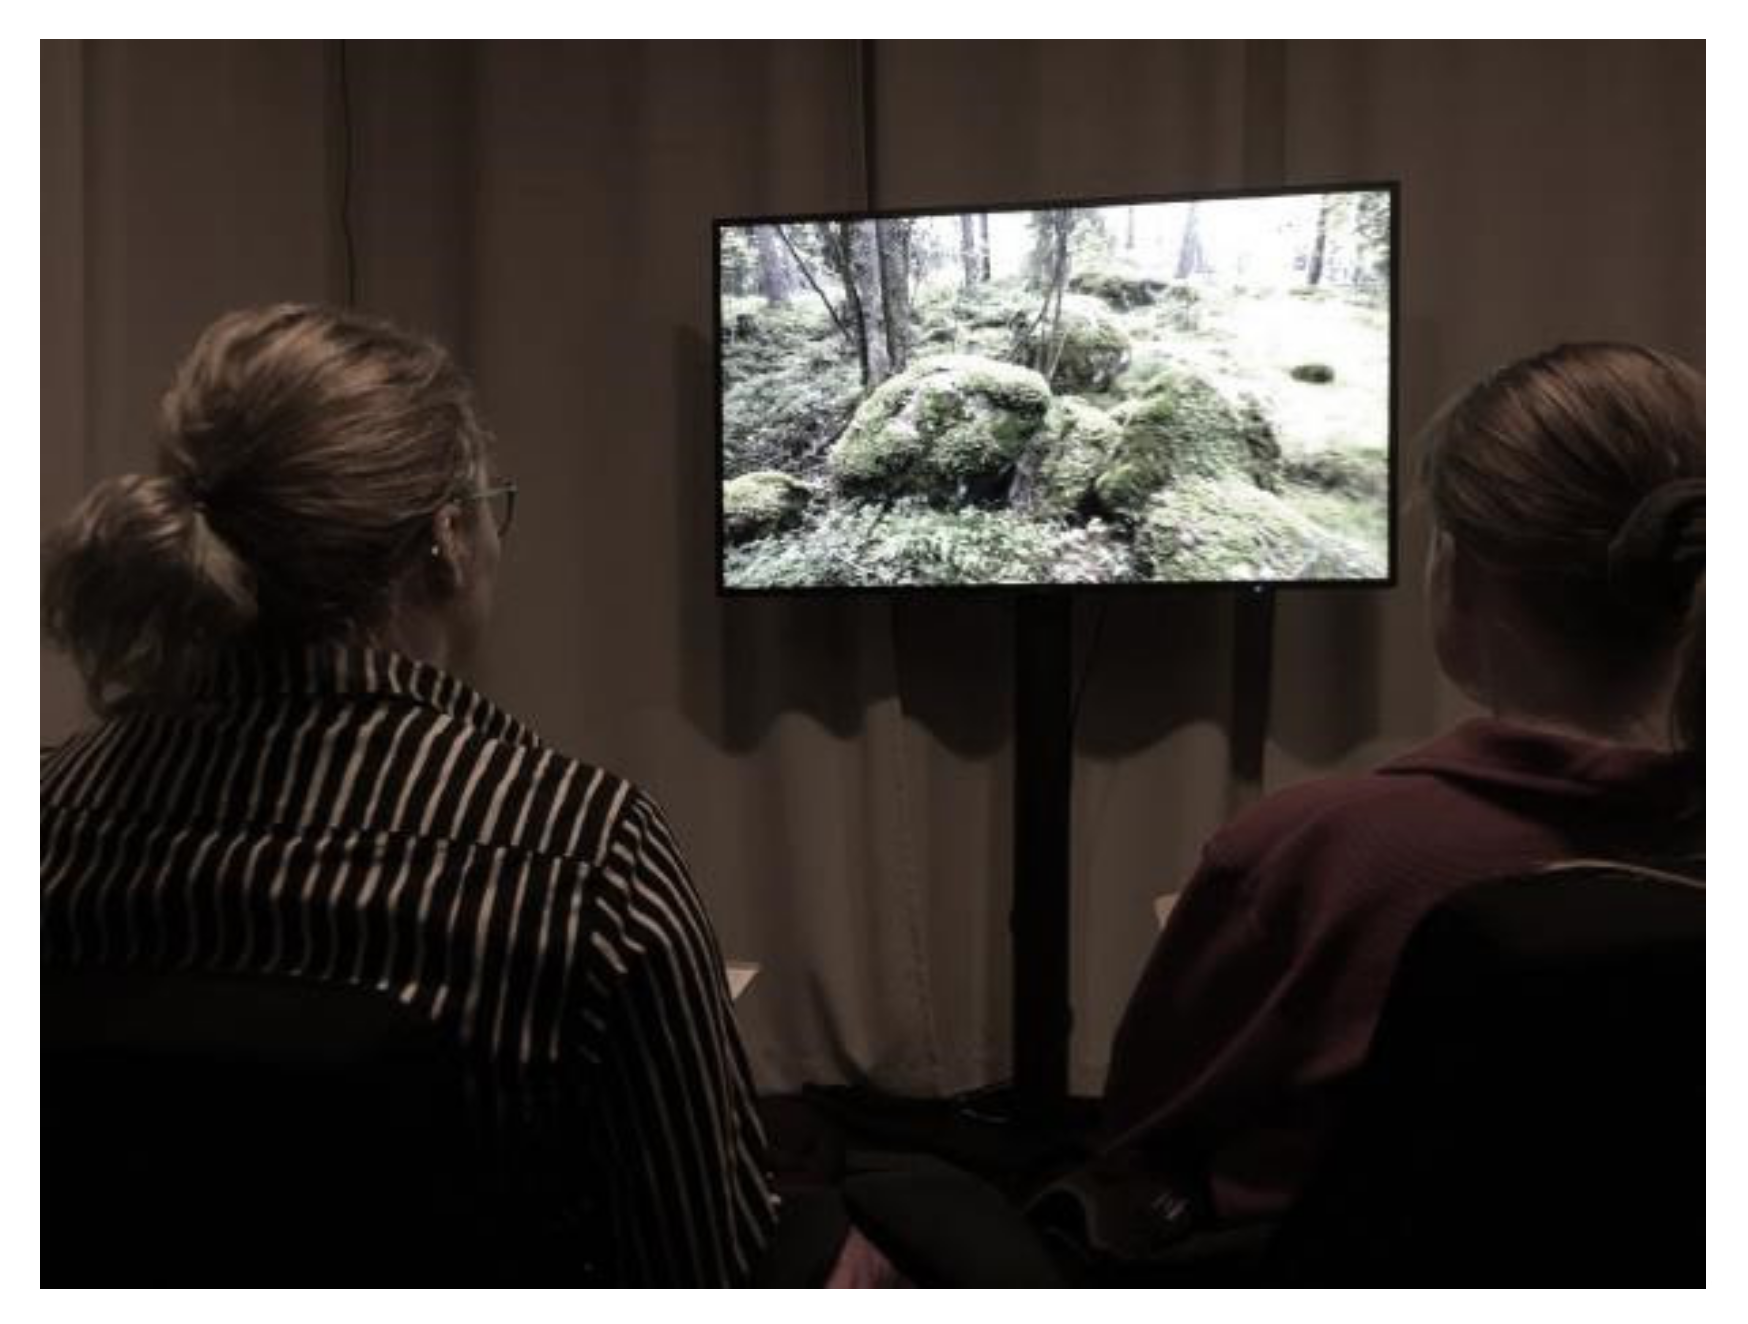 IJERPH | Free Full-Text | Effect of Viewing Video Representation of the  Urban Environment and Forest Environment on Mood and Level of  Procrastination